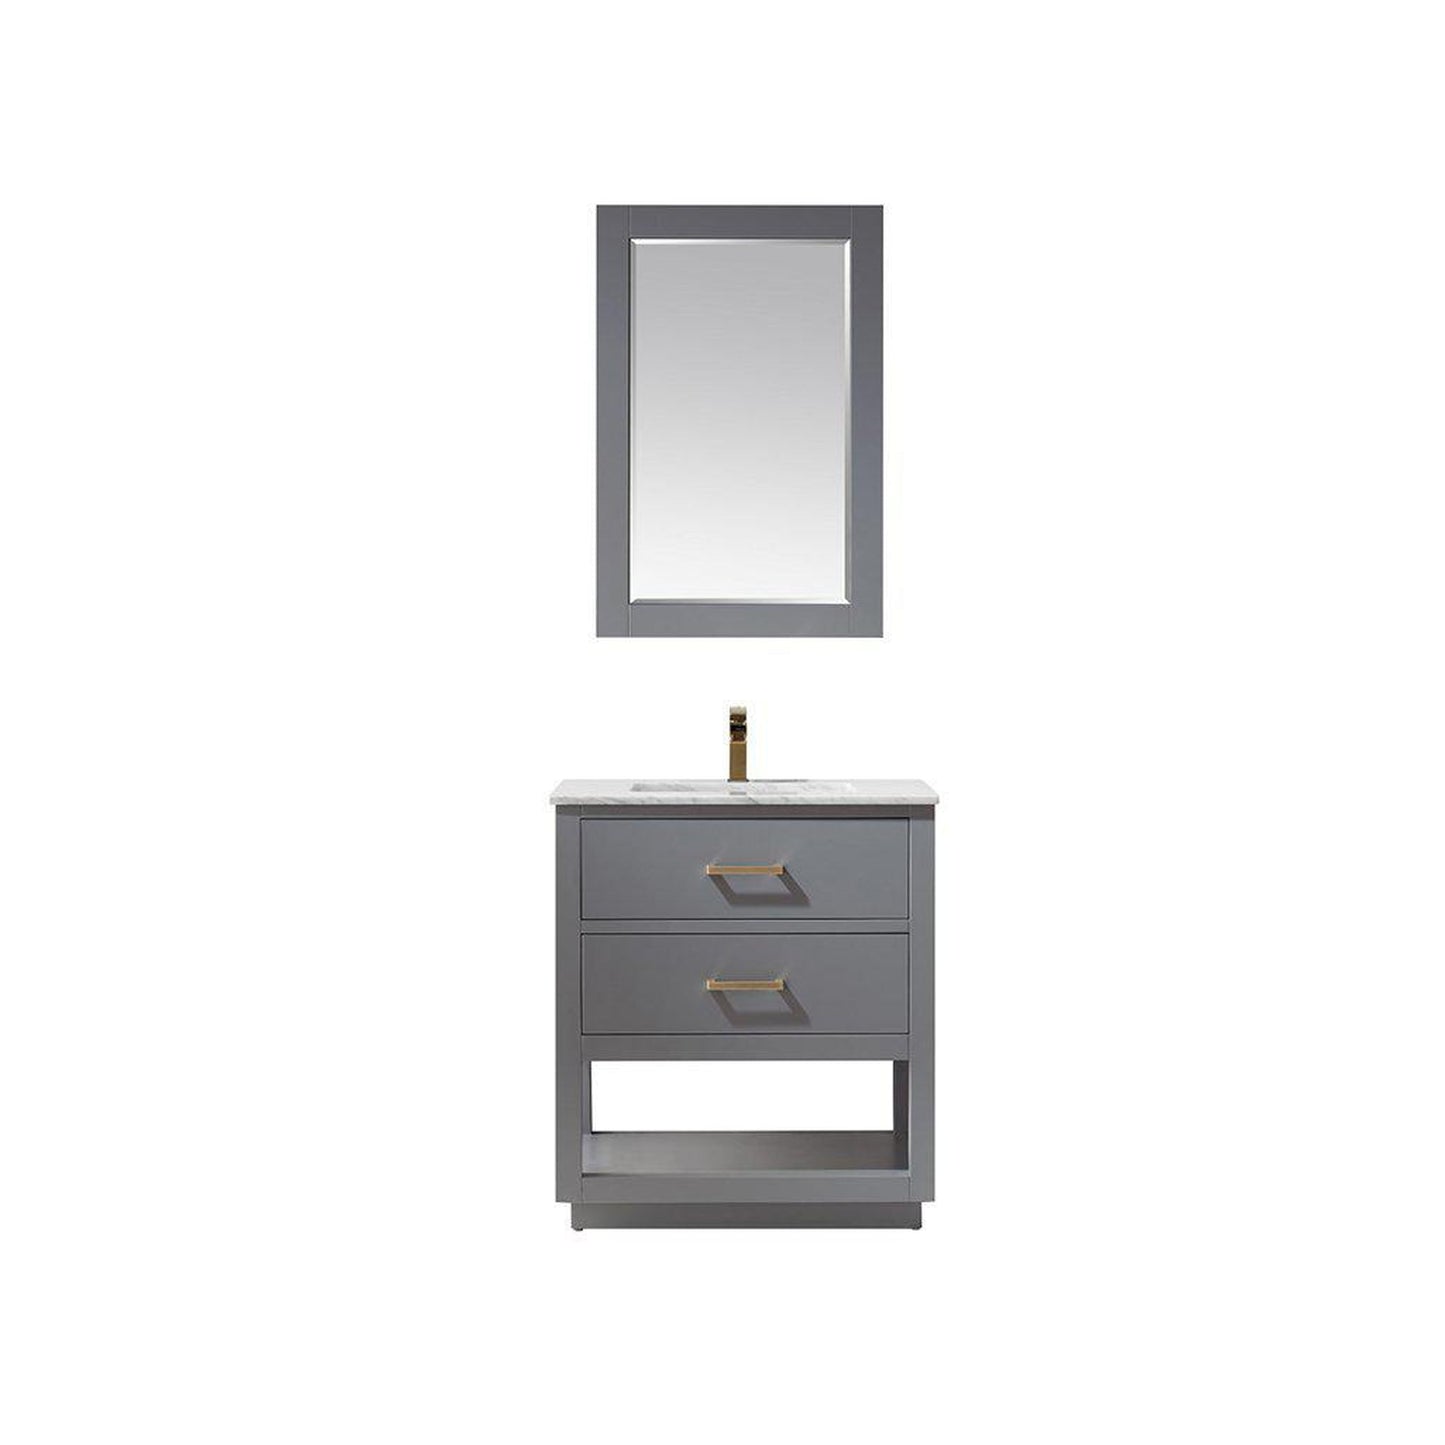 Altair Remi 30" Single Gray Freestanding Bathroom Vanity Set With Mirror, Natural Carrara White Marble Top, Rectangular Undermount Ceramic Sink, and Overflow